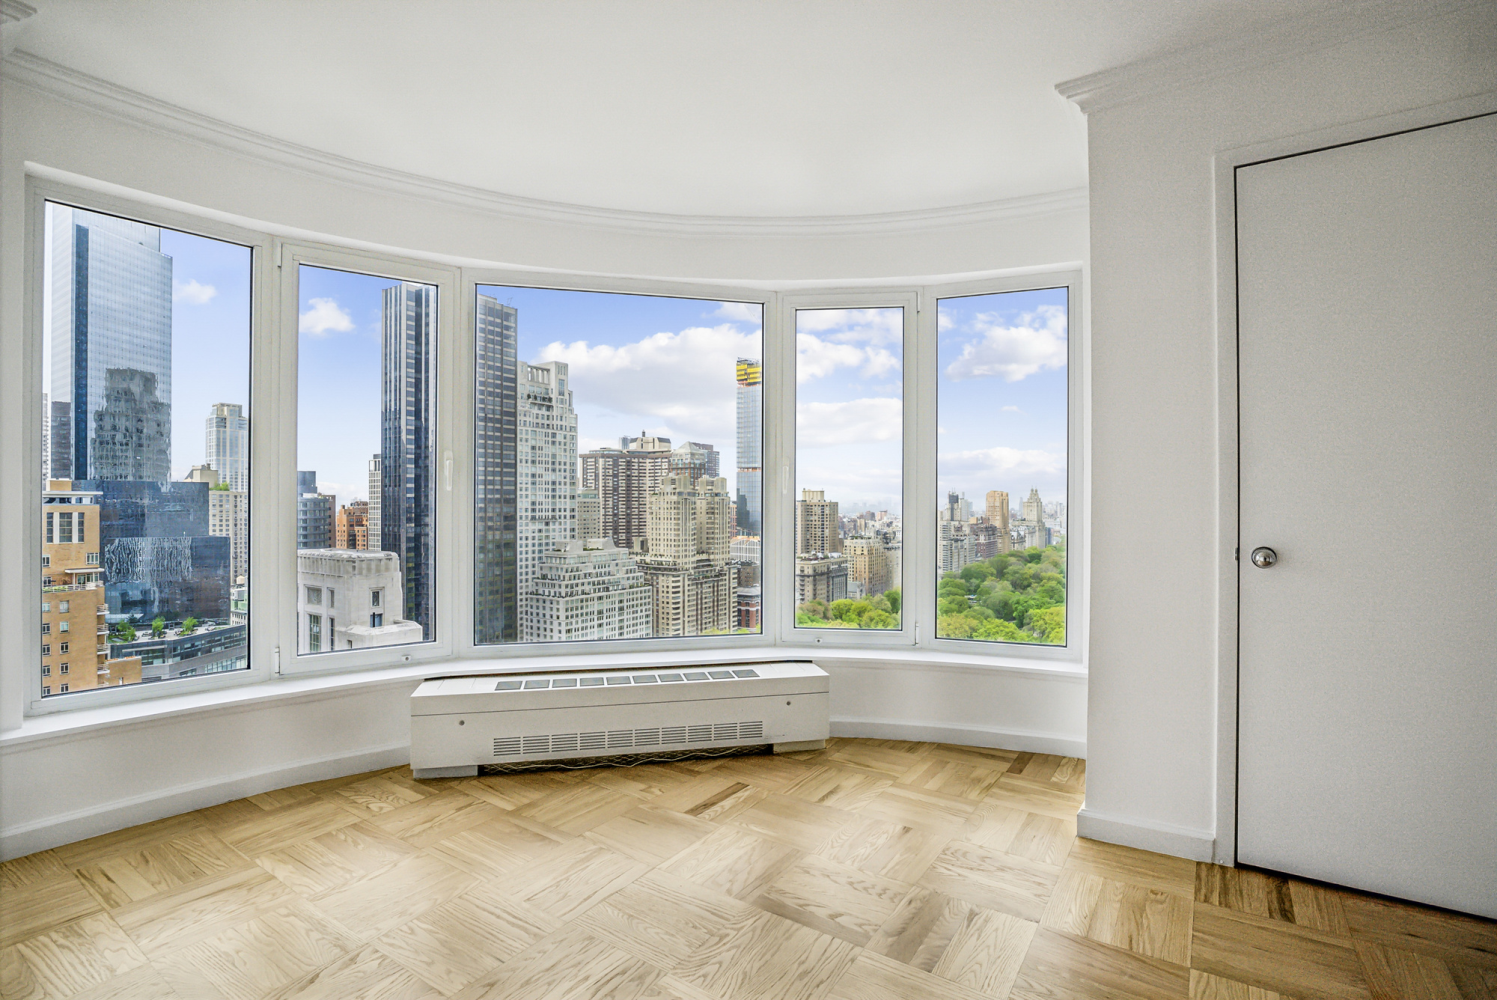 200 Central Park 34C, Central Park South, Midtown West, NYC - 2 Bedrooms  
2.5 Bathrooms  
5 Rooms - 